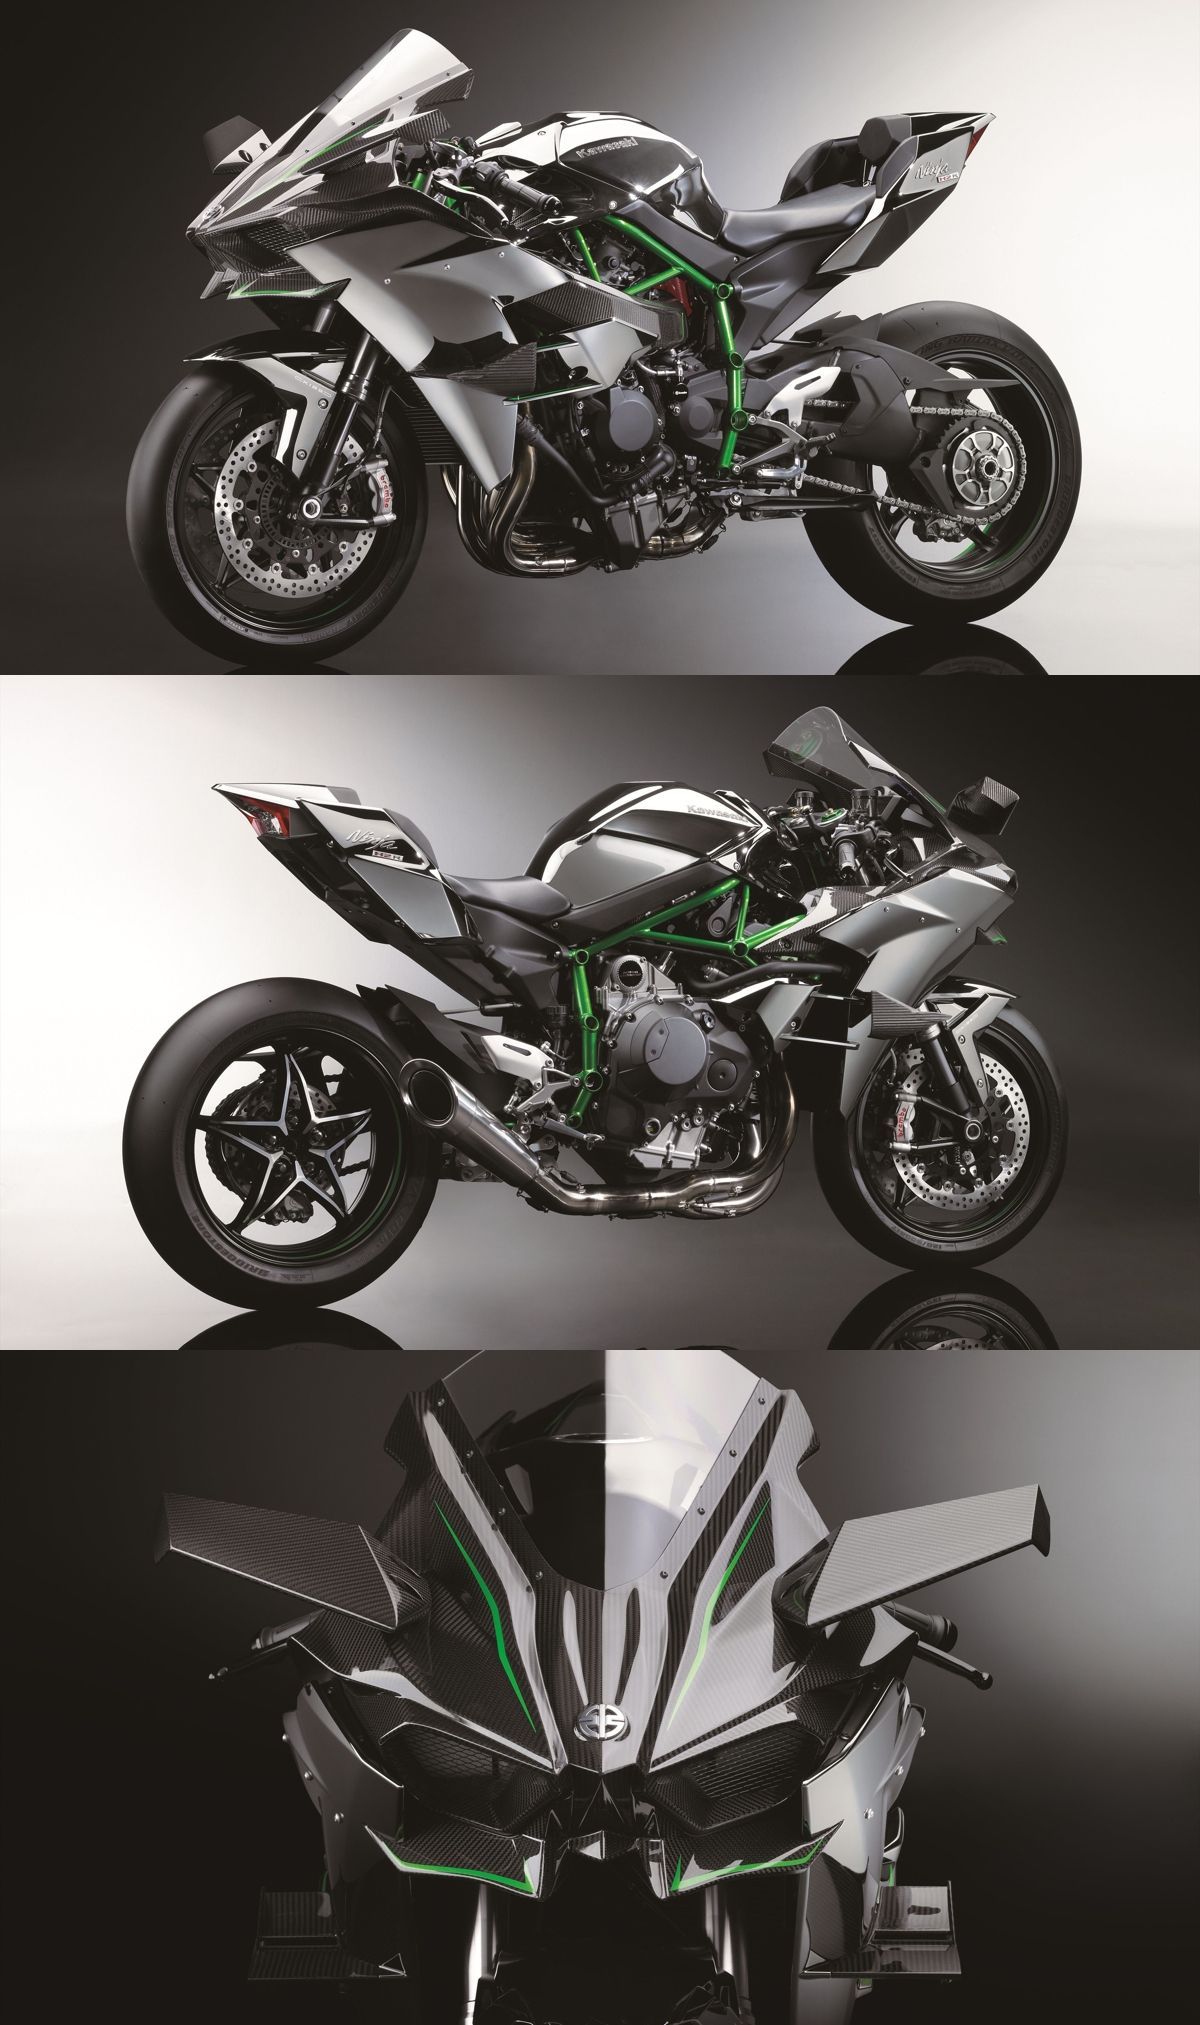 Kawasaki Ninja H2R – With 300hp from a supercharged engine, its so fast it needs wings.